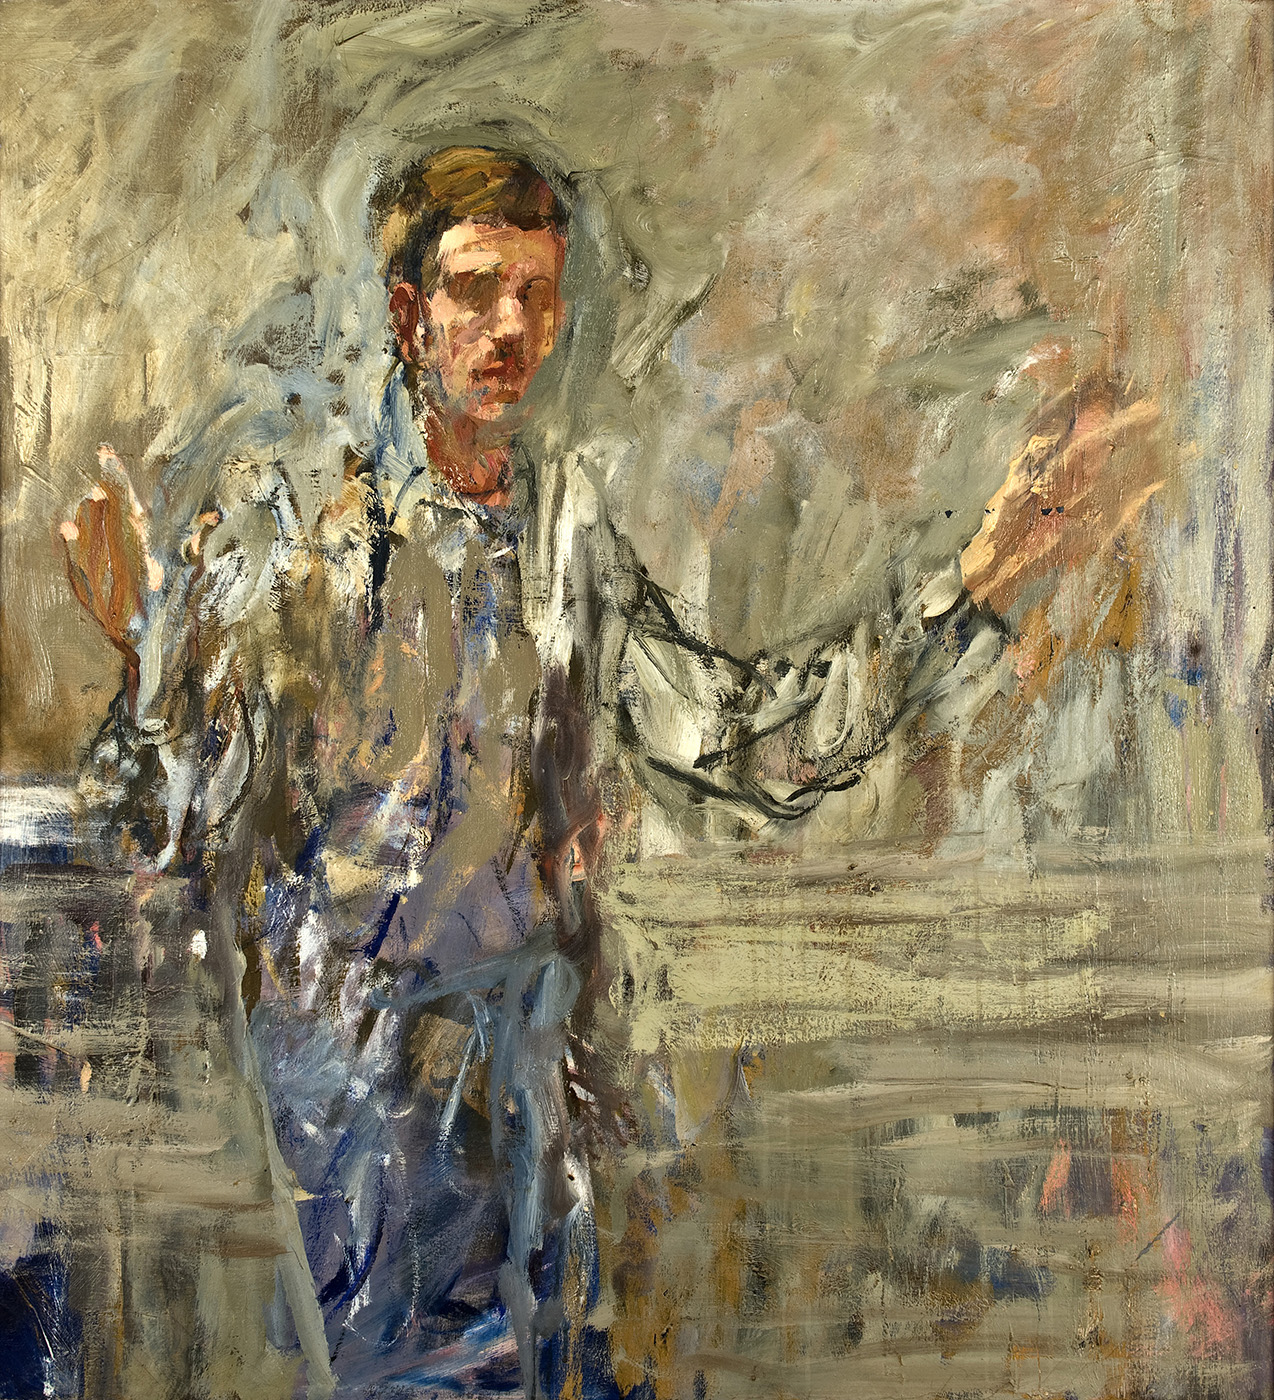  A Young Man, Probably The Artist; oil on canvas, 48 x 44 inches, 1963 